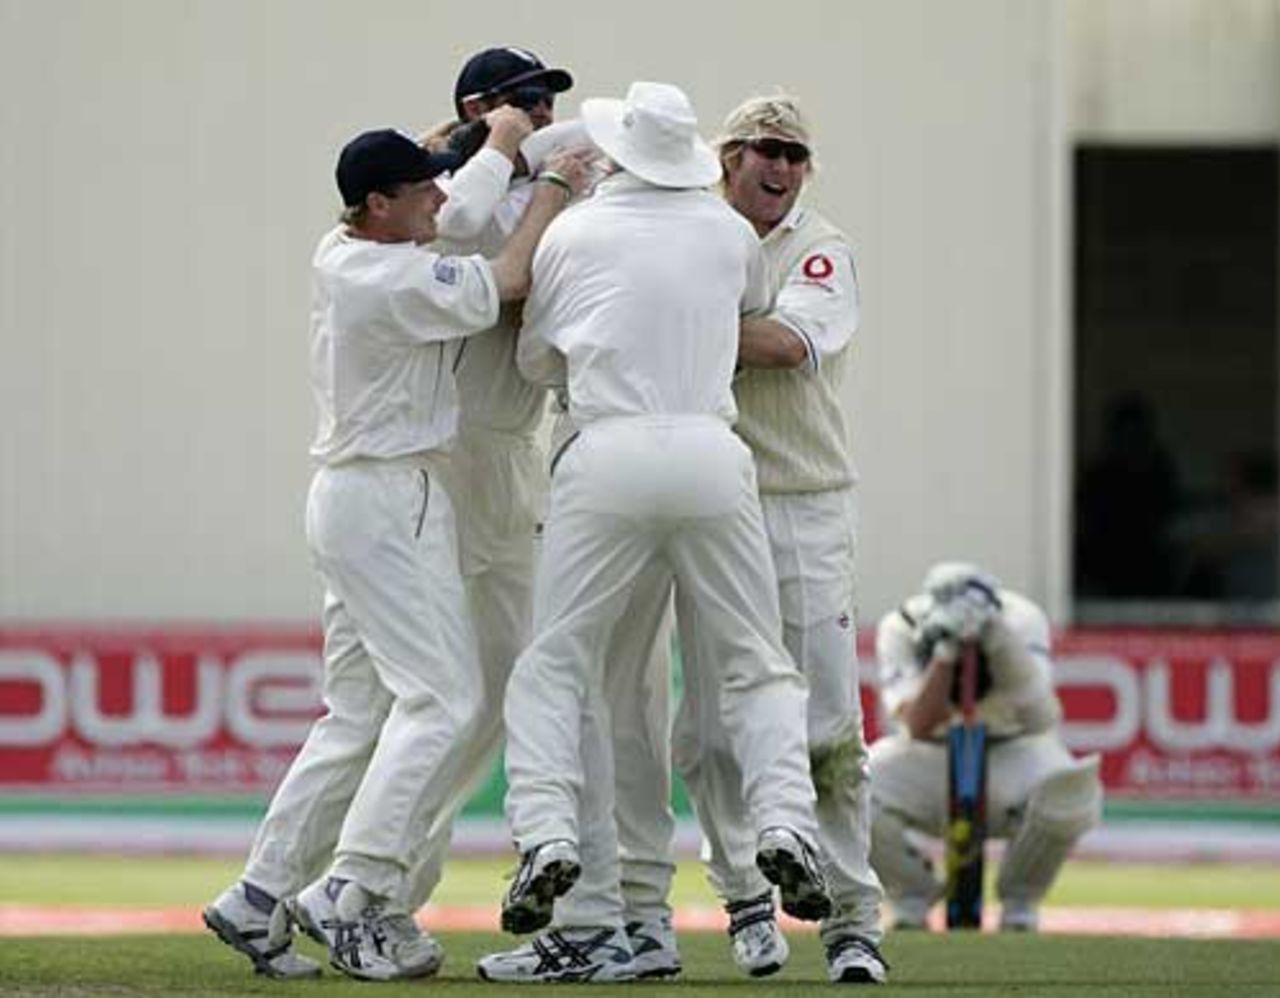 England jump for joy as Lee despairs after the final wicket falls, England v Australia, 2nd Test, Edgbaston, August 7